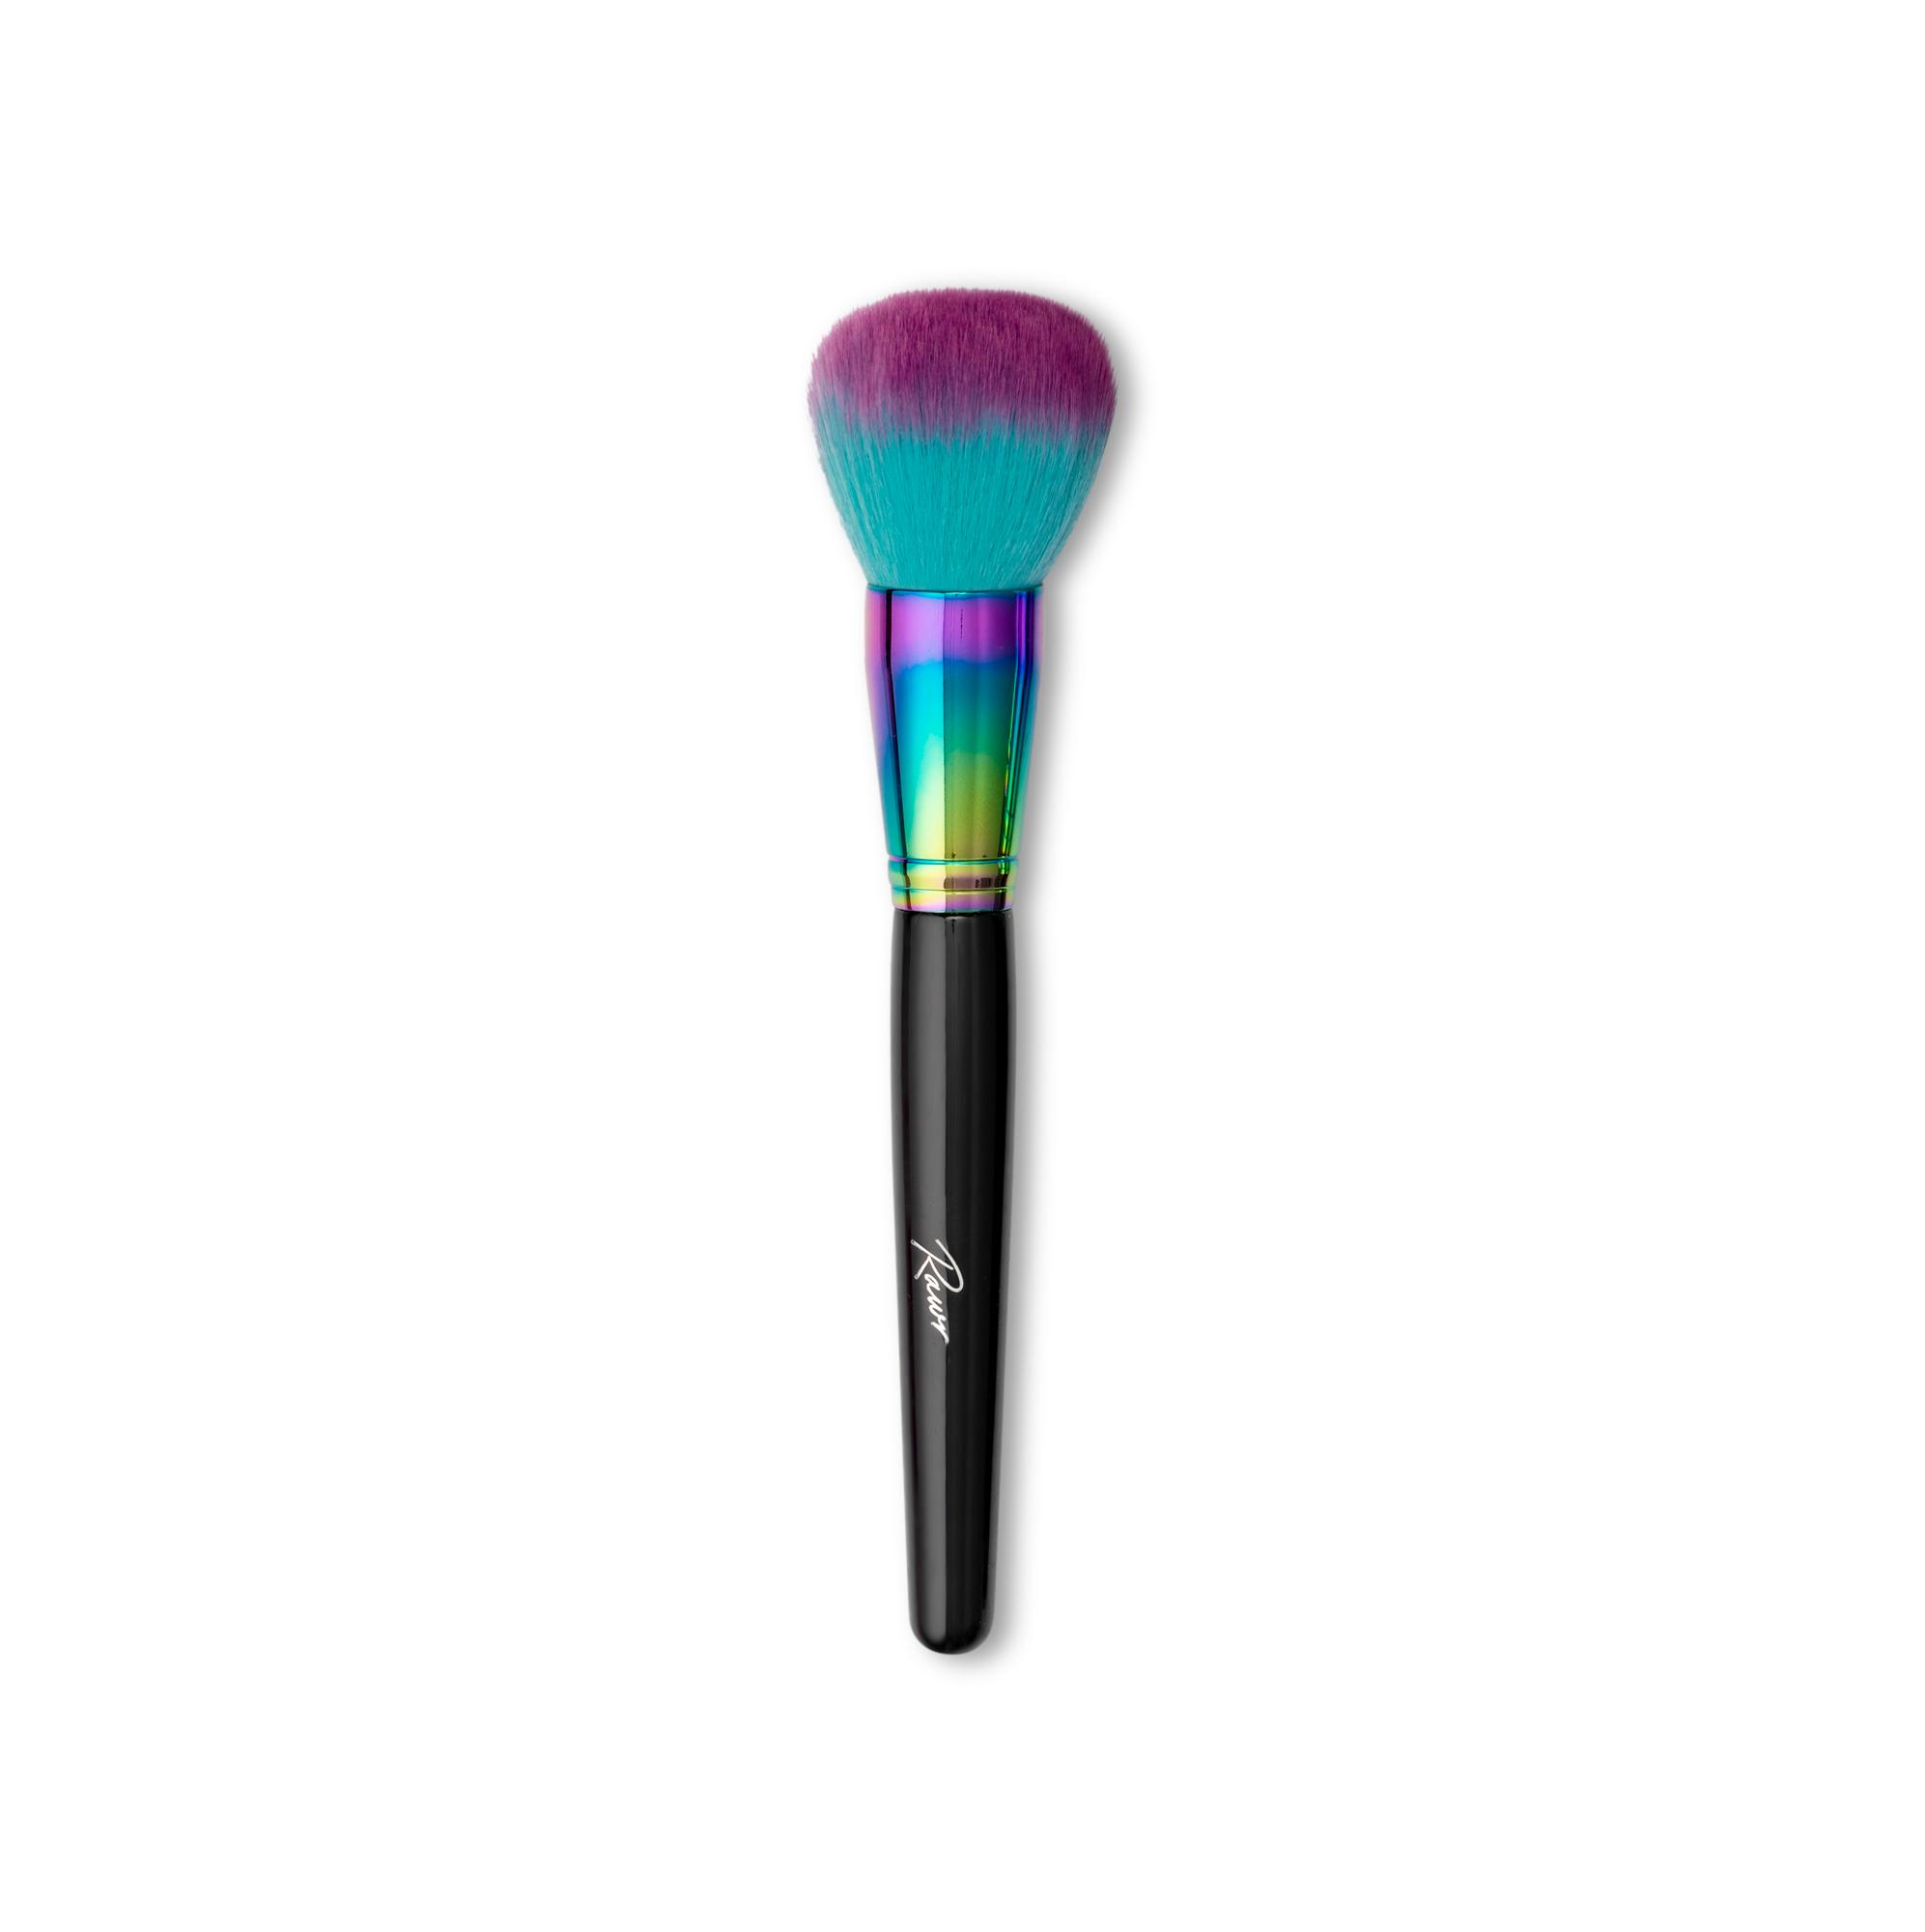 Product Shop Rawr Beauty - The Powers In The Powder Brush  (RW1212) image